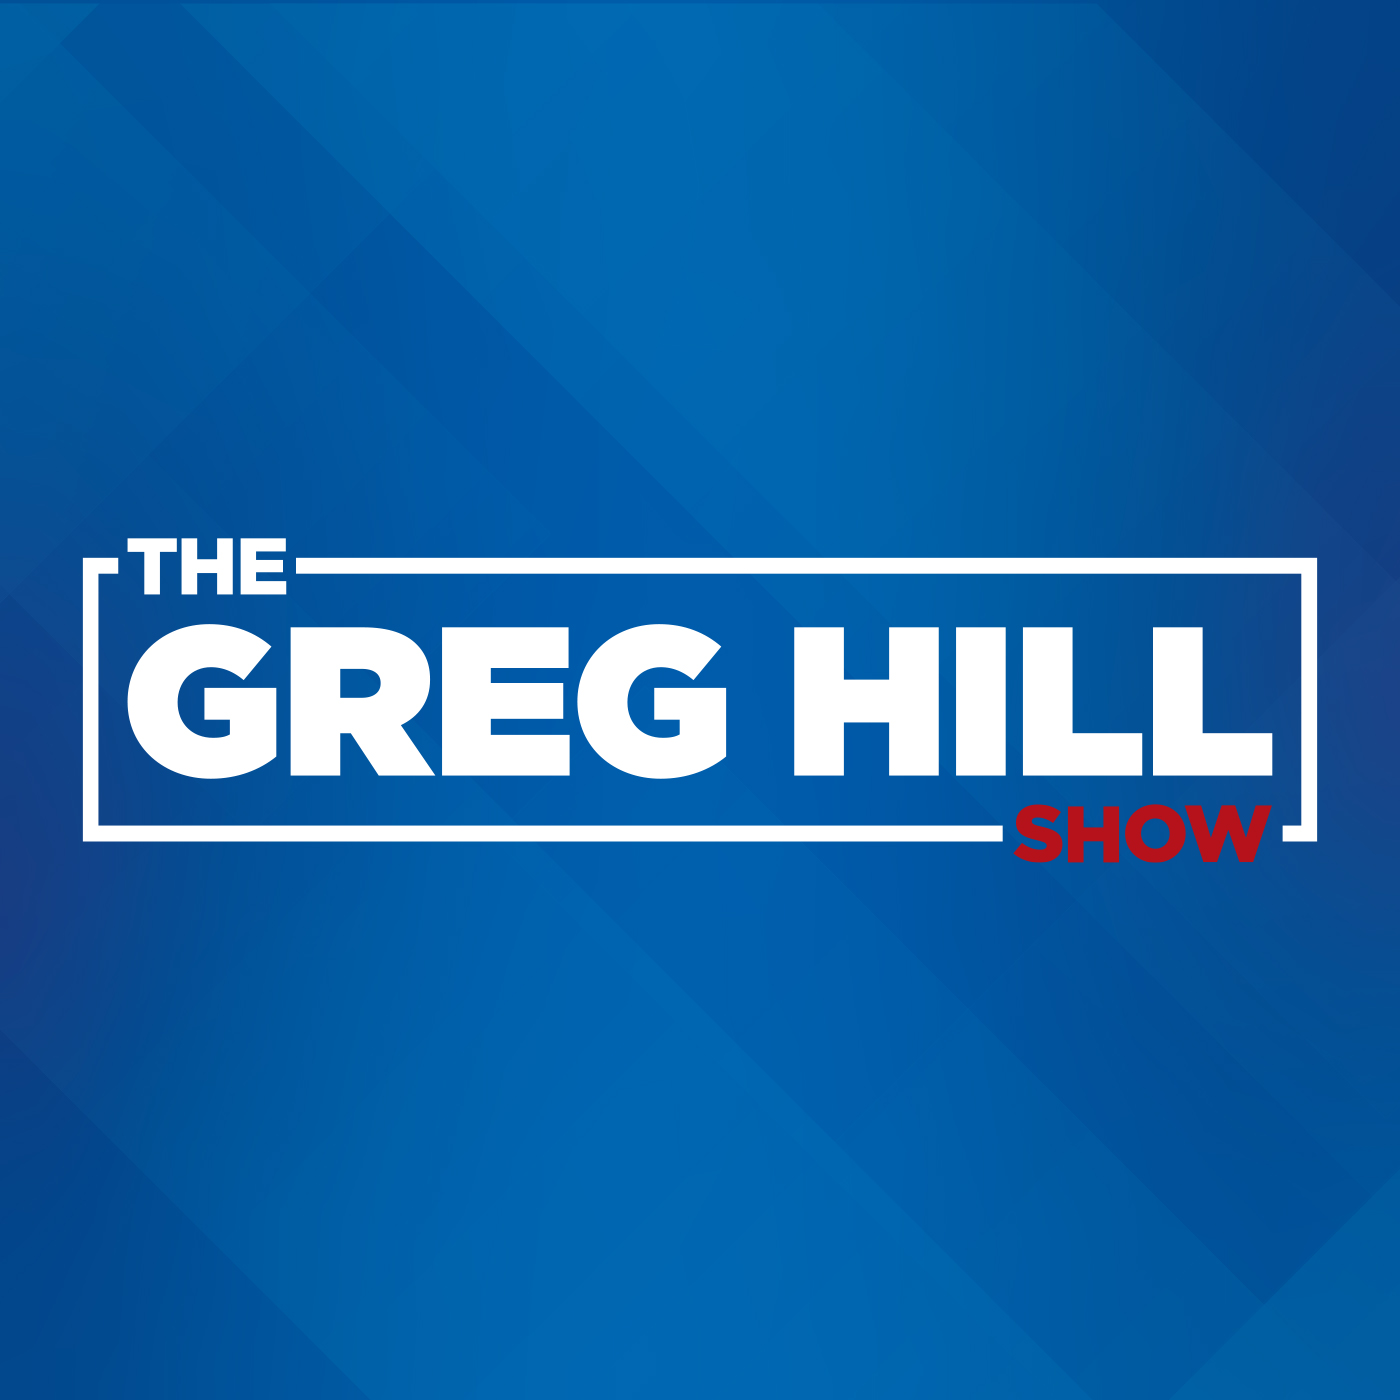 The definitive list of the most influential athletes in Boston, according to The Greg Hill Show